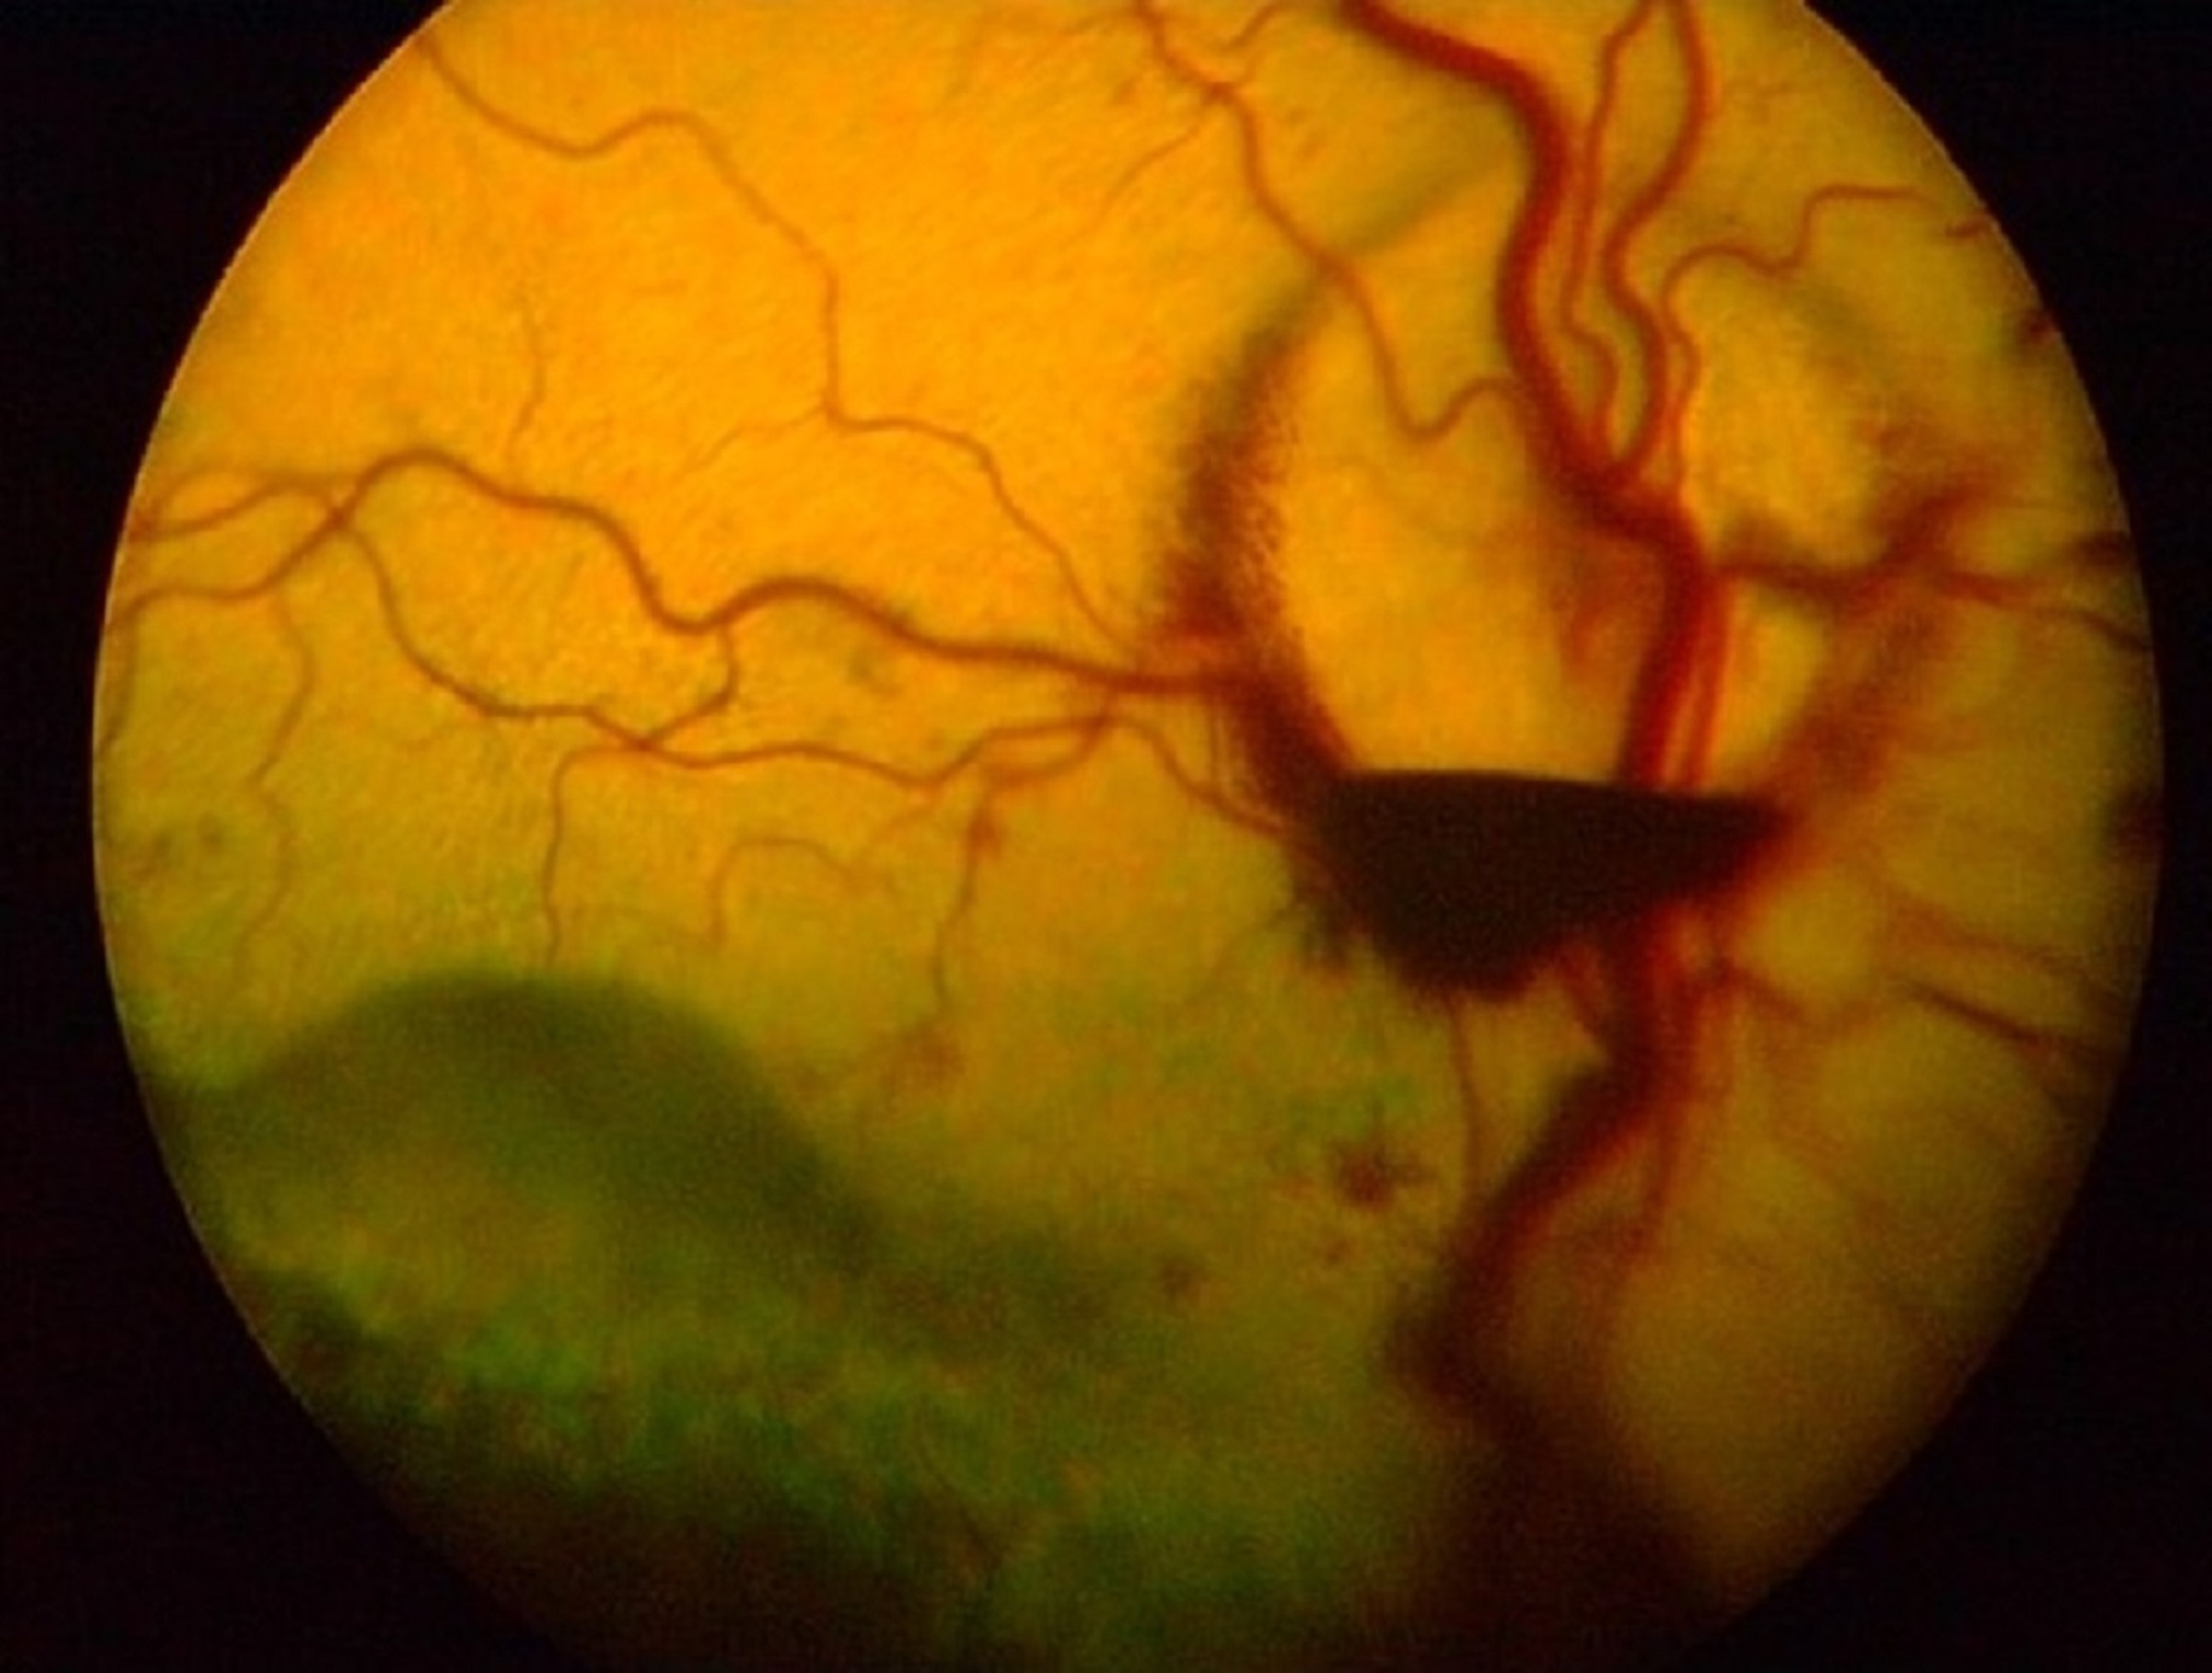 Retinal hemorrhage and detachment secondary to systemic hypertension, dog